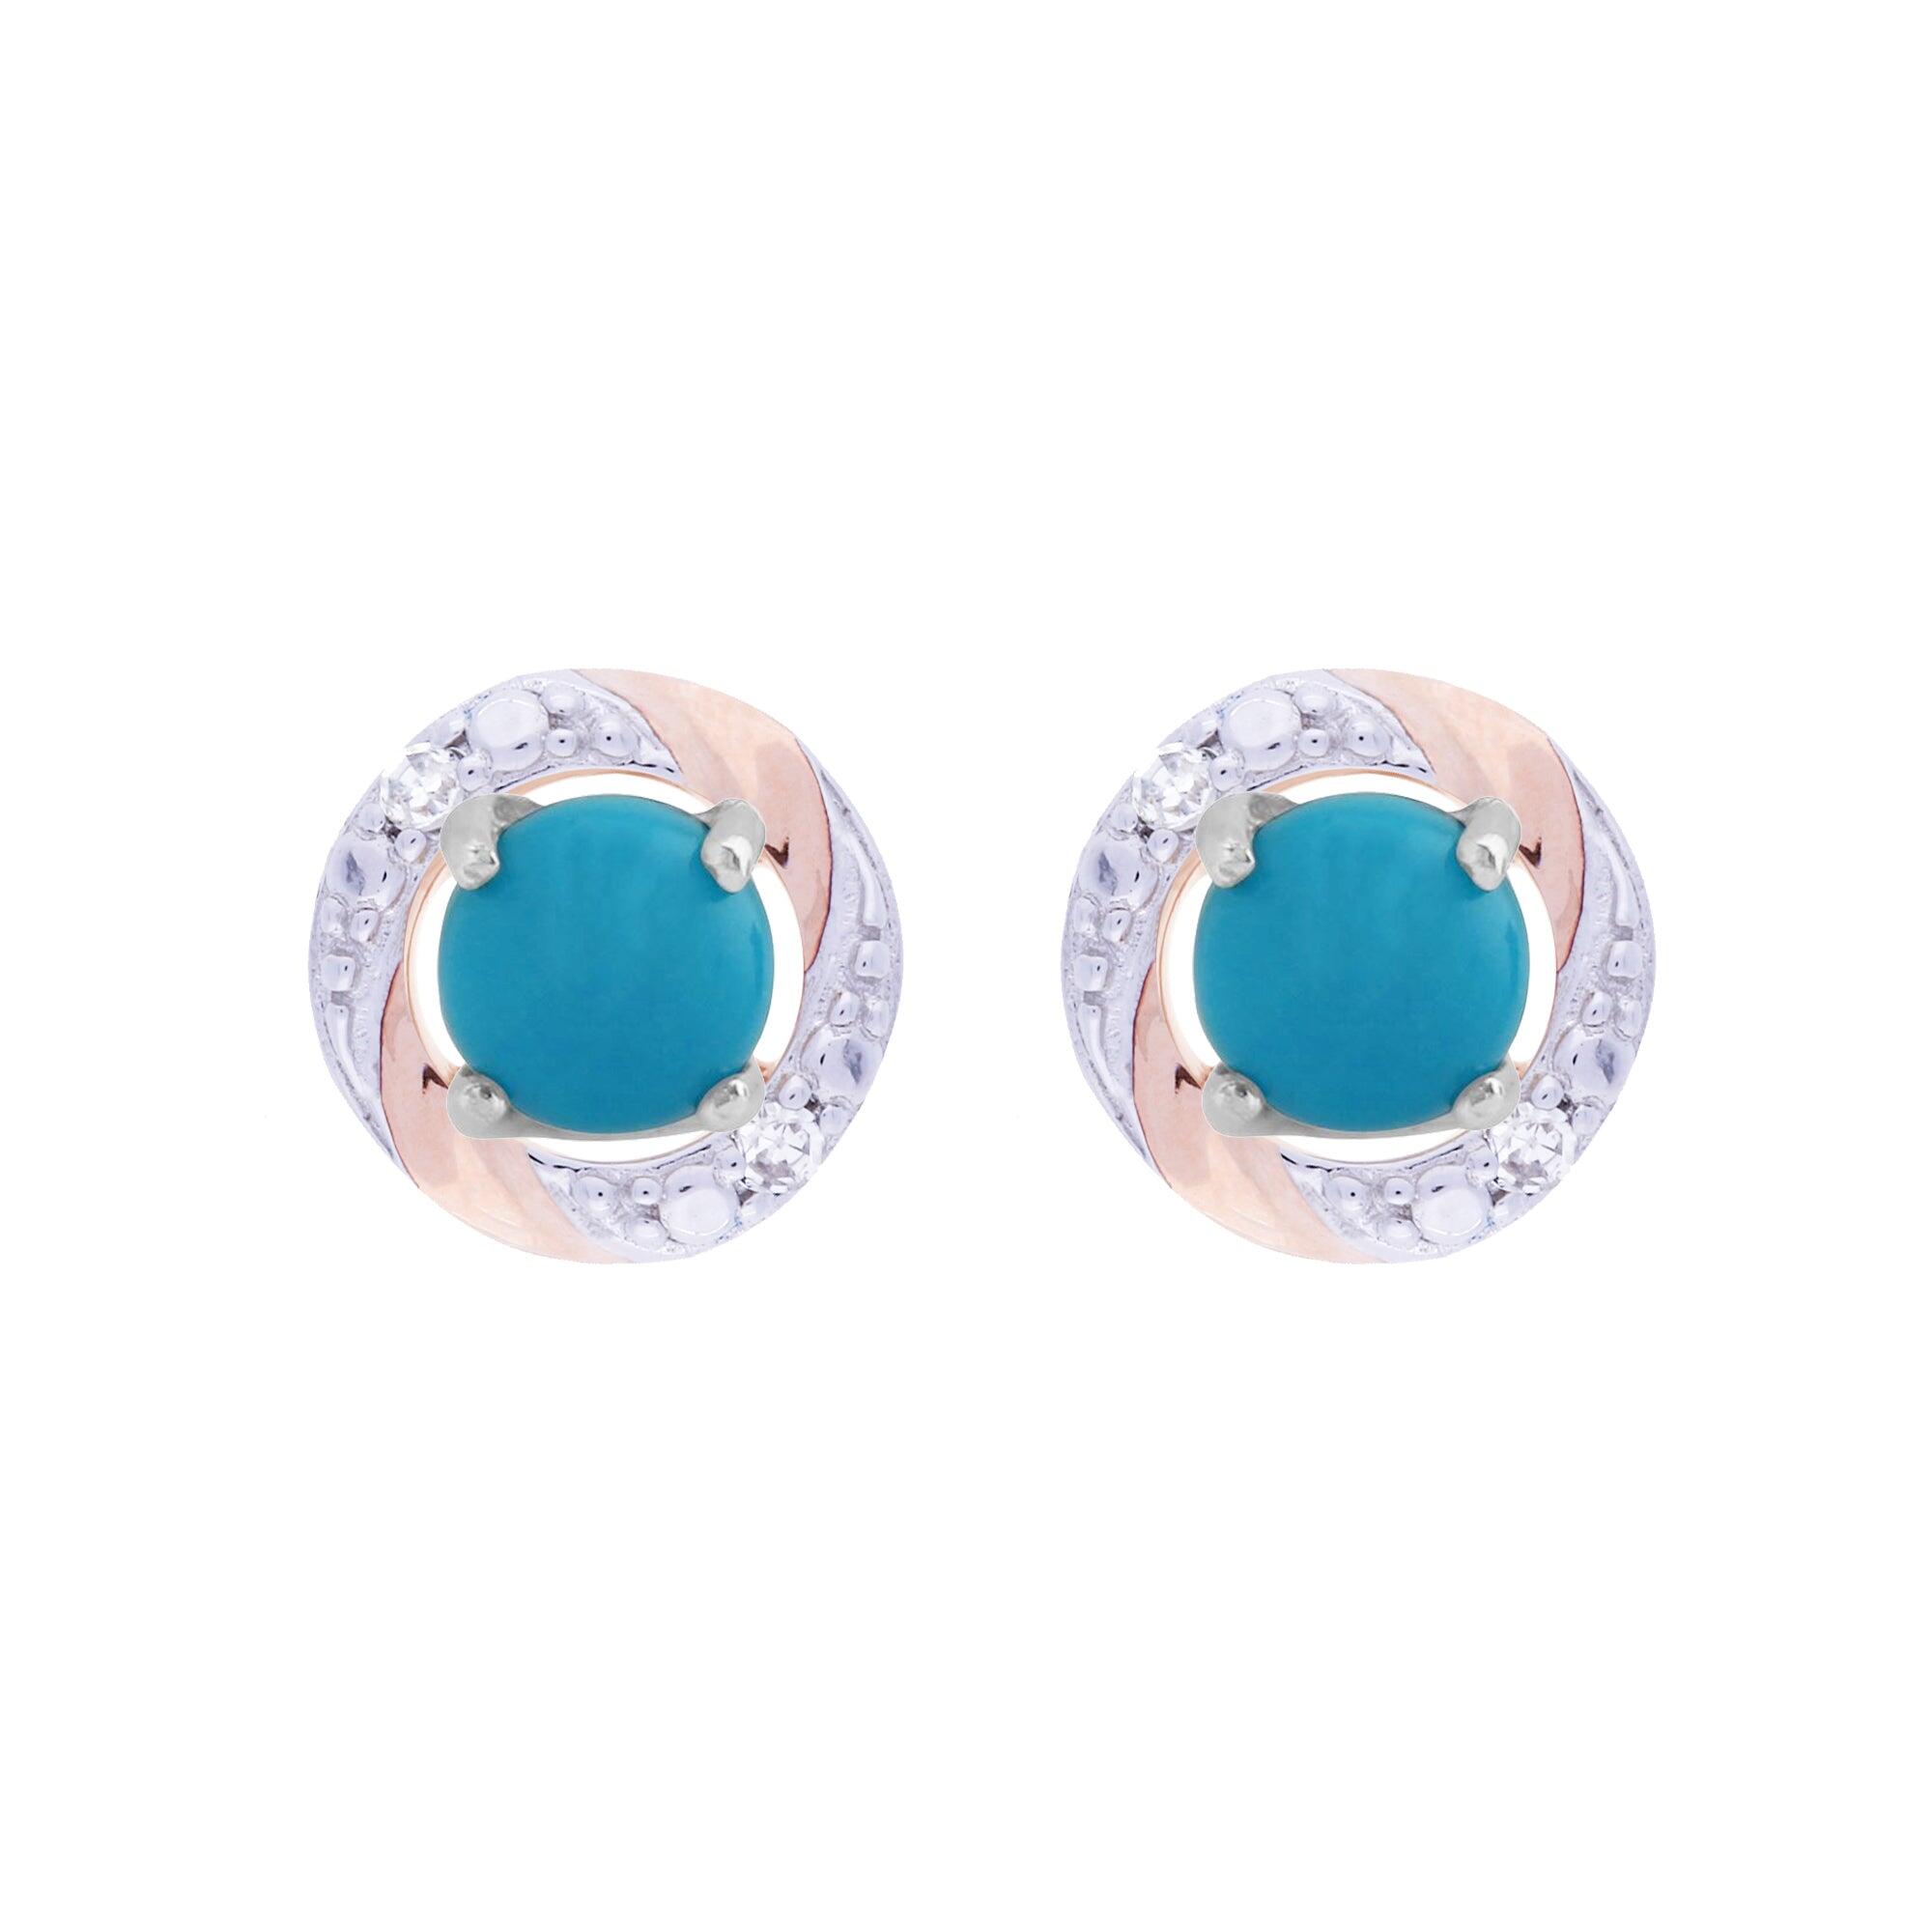 Classic Round Turquoise Stud Earrings with Detachable Diamond Round Earrings Jacket Set in 9ct White Gold